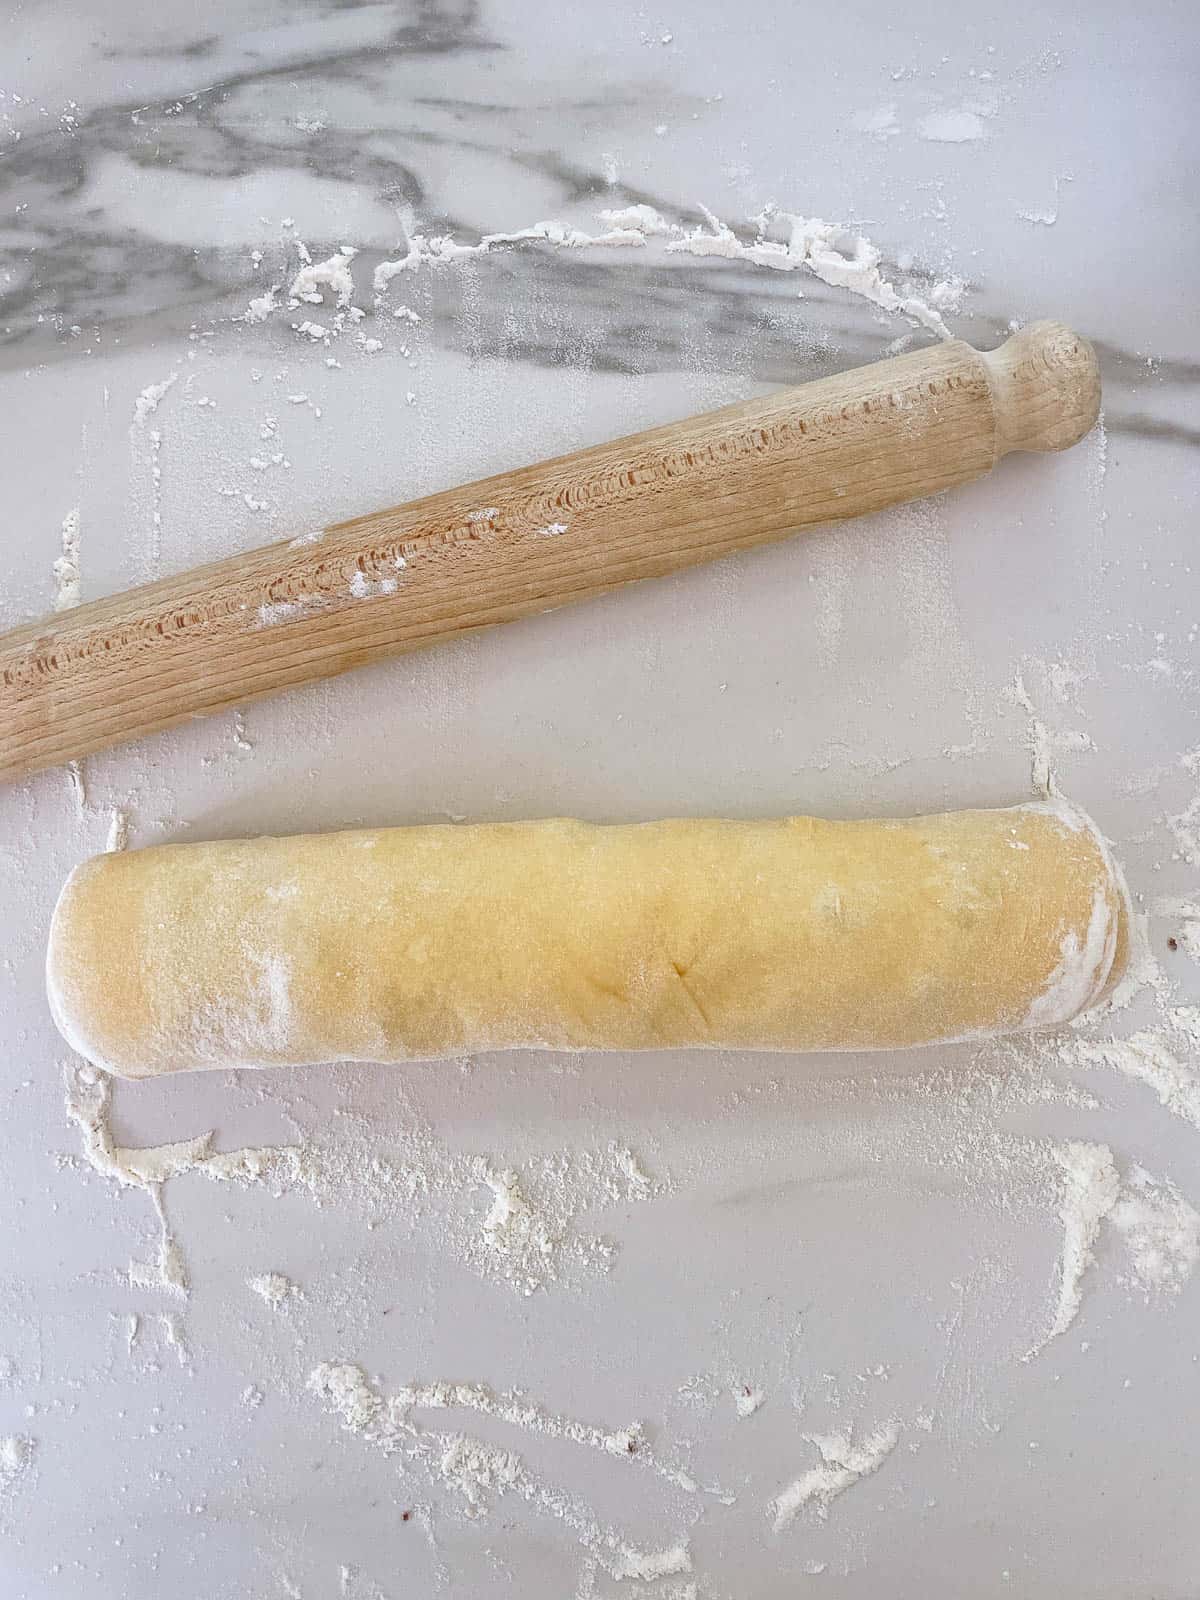 Cinnamon roll dough rolled into sausage shape with rolling pin alongside.